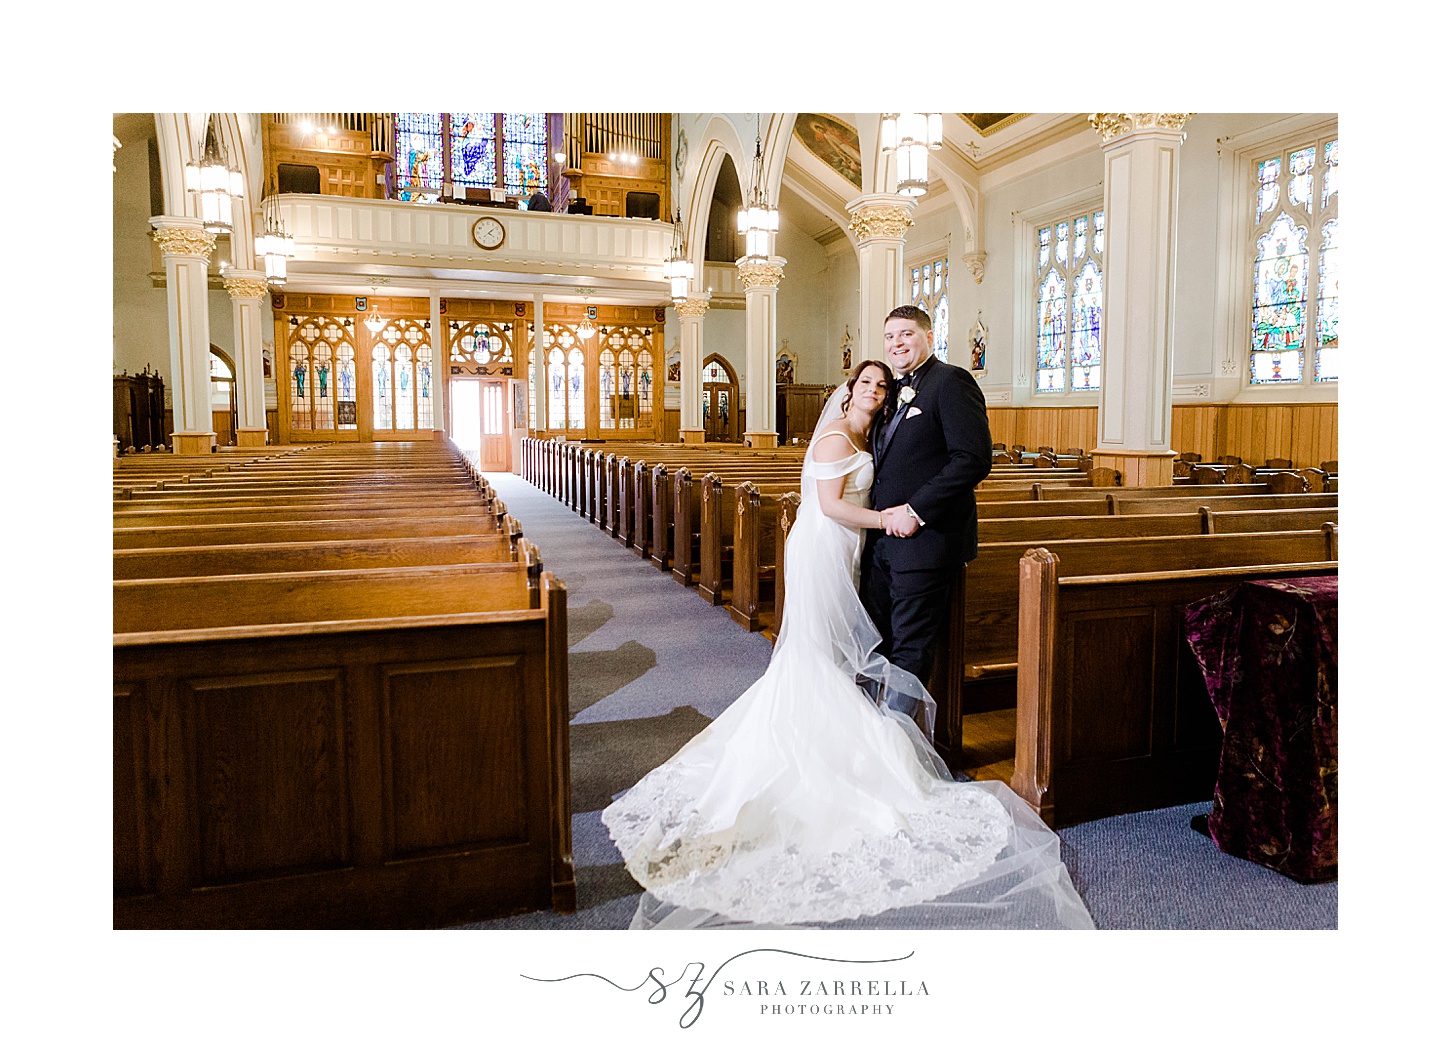 newlyweds pose between seats in chapel at Our Lady of the Rosary